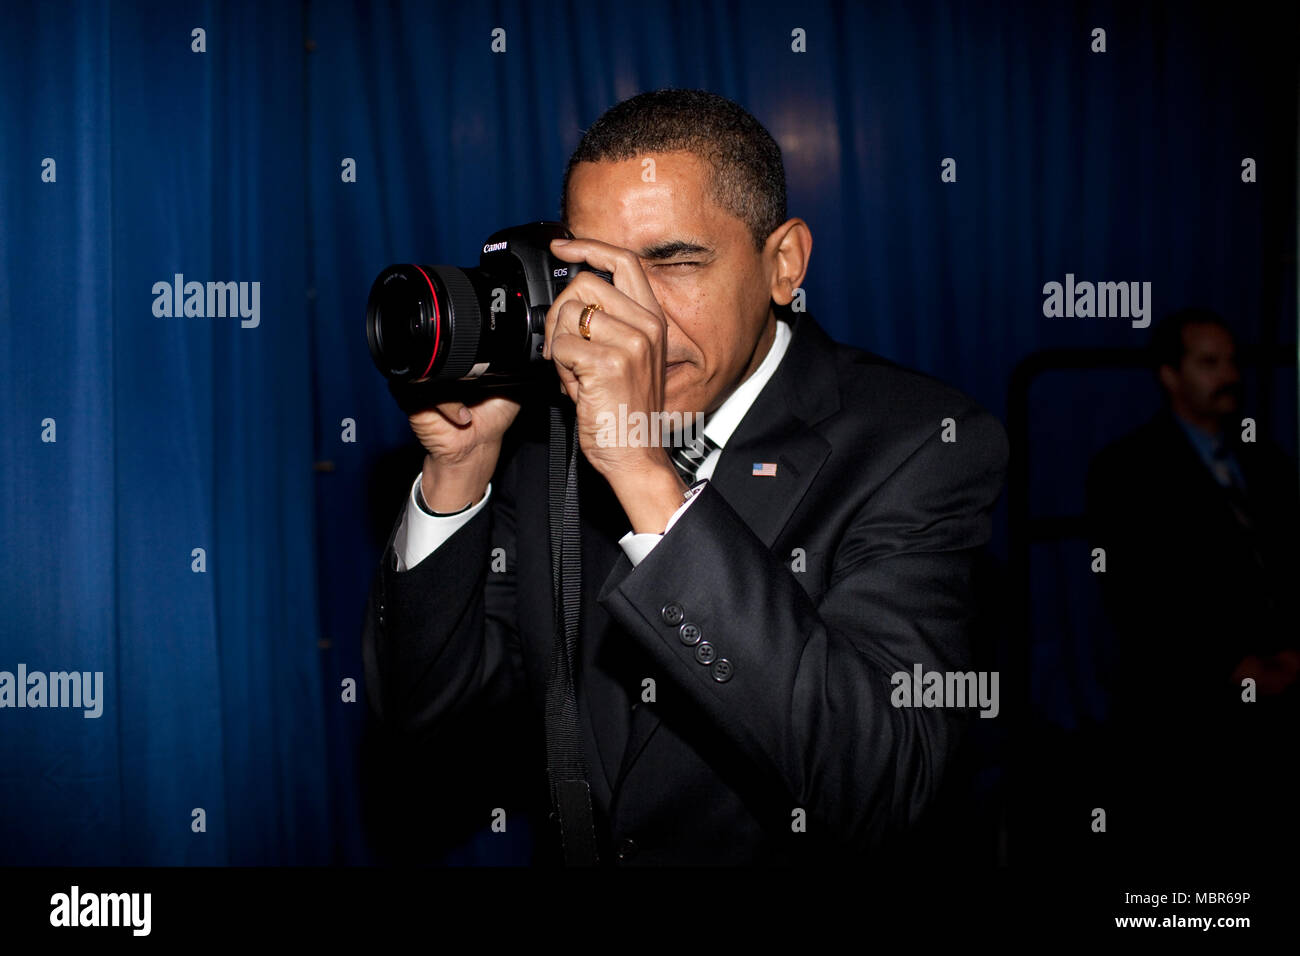 President Barack Obama takes aim with a photographer's camera backstage prior to remarks about providing mortgage payment relief for responsible homeowners. Dobson High School. Mesa, Arizona 2/18/09. .Official White House Photo by Pete Souza Stock Photo